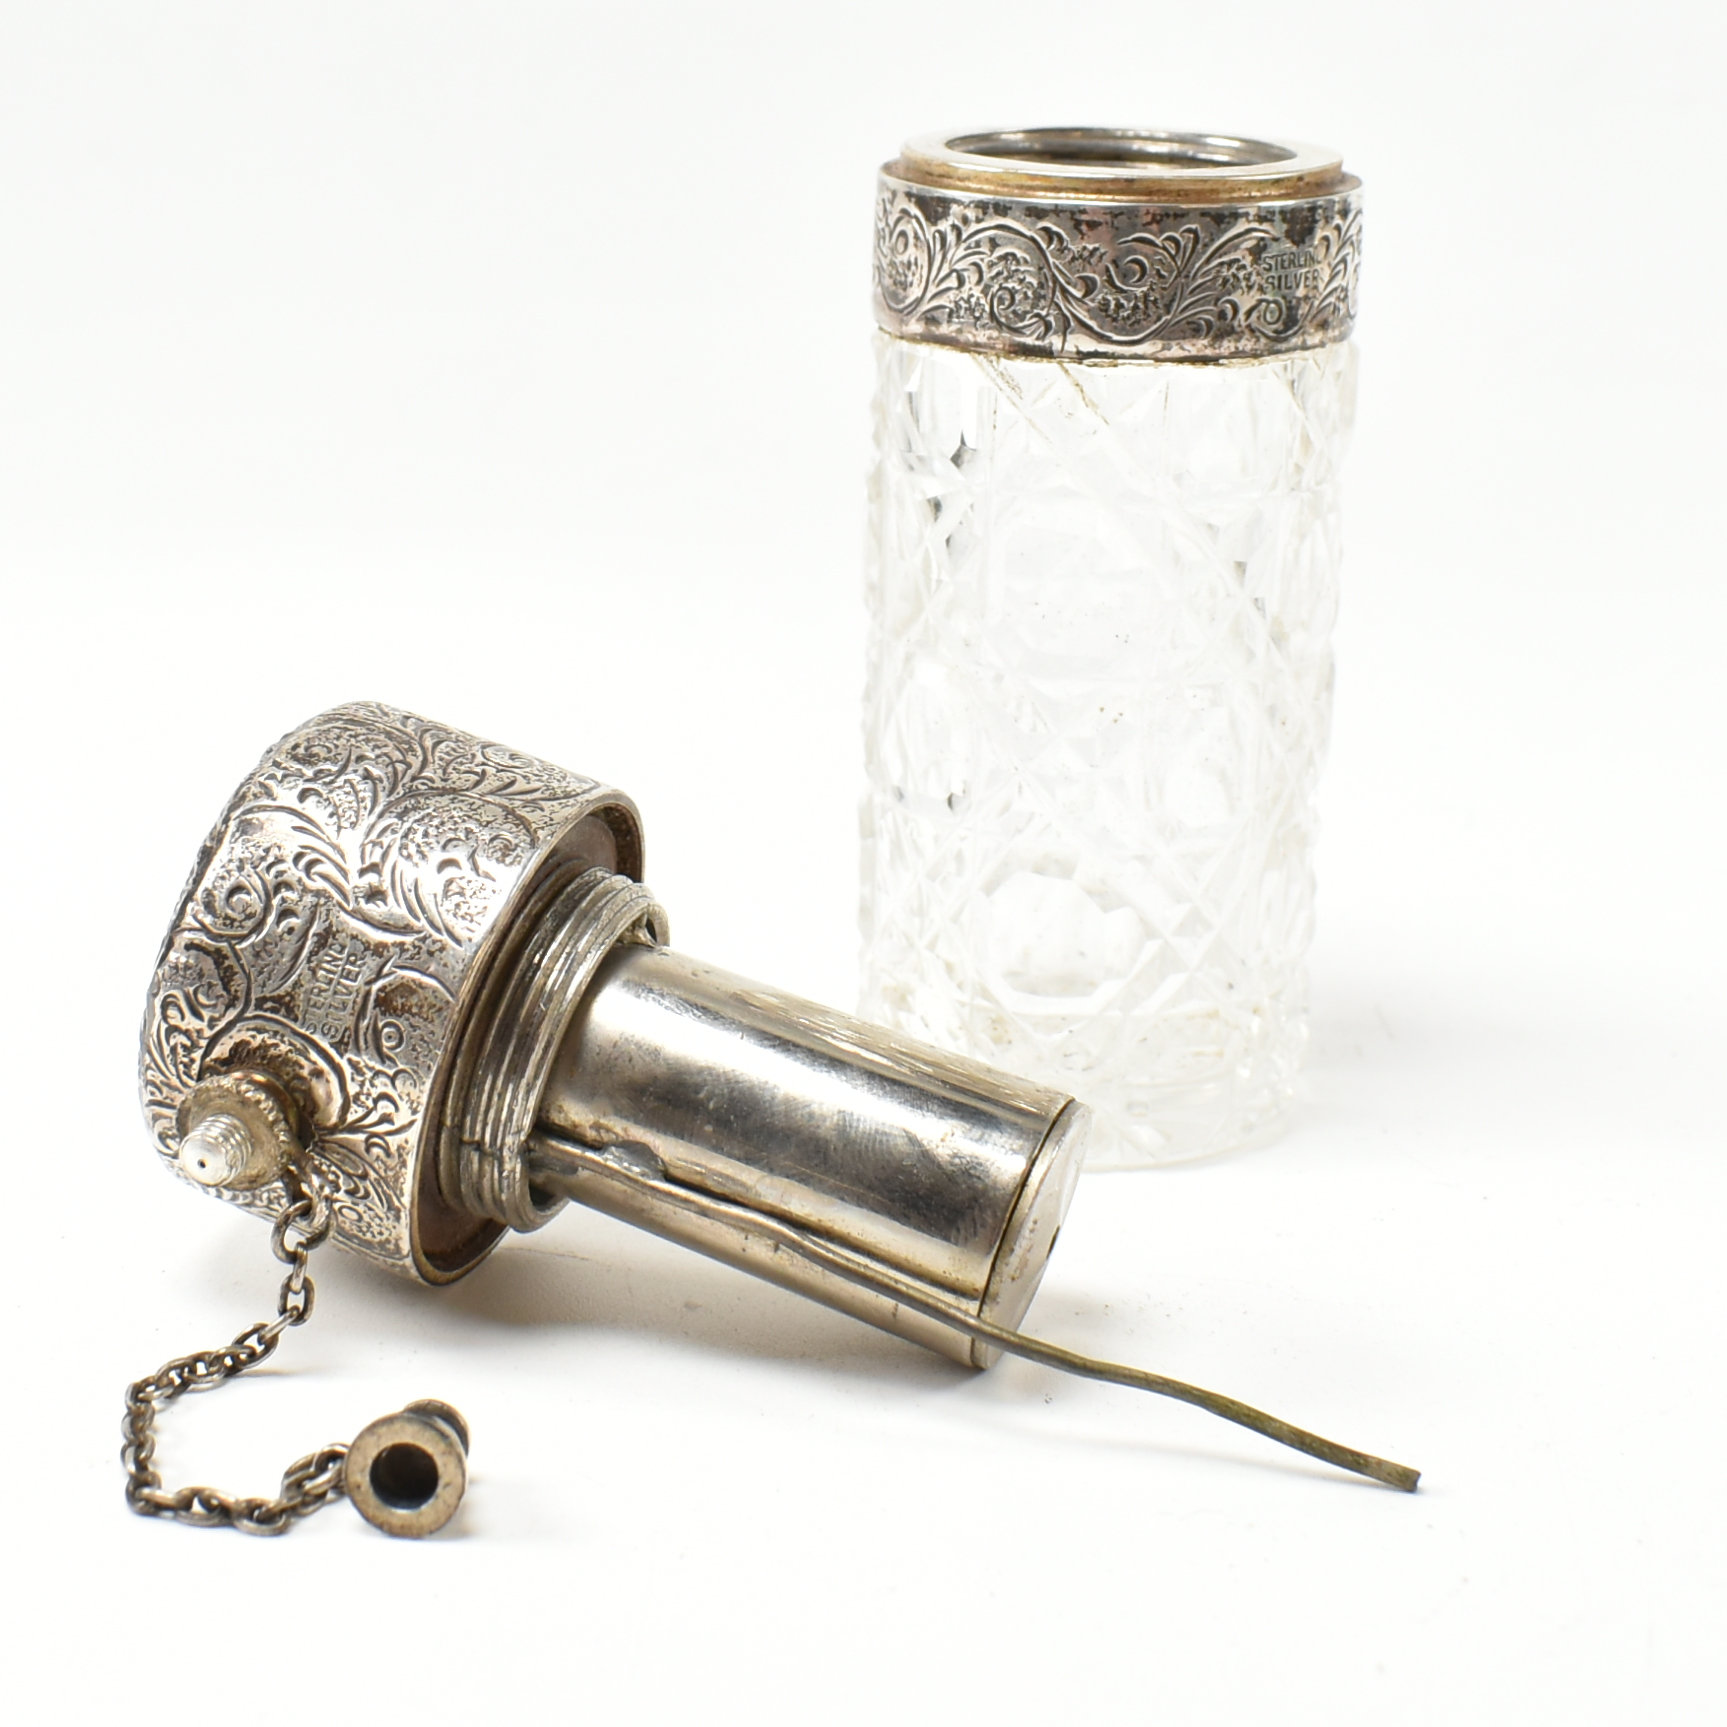 ANTIQUE & LATER CUT GLASS SCENT BOTTLES INCLUDING SILVER MOUNTED - Image 8 of 10